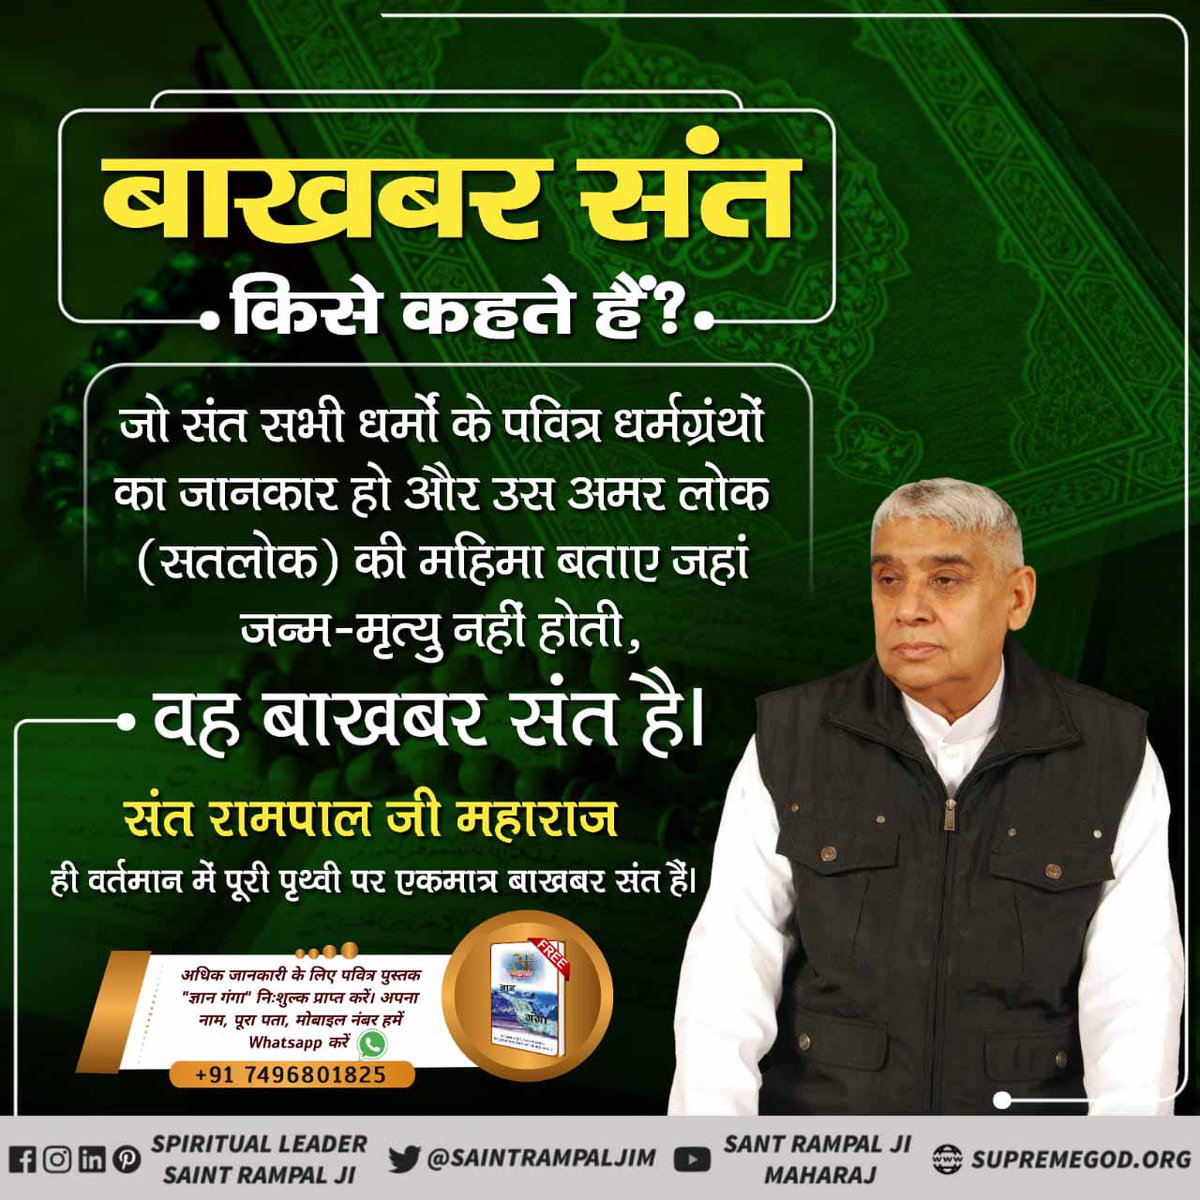 The knowledge giver of the QuranSharif says that it is AllahuAkbar who created the world in 6 days and sat on the throne on the seventh day.Ask all his information to any Bakbar Ilmwale.I am not fully aware.  The one who has Quran is none #अल्लाह_का_बाख़बर
Baakhabar Sant RampalJi